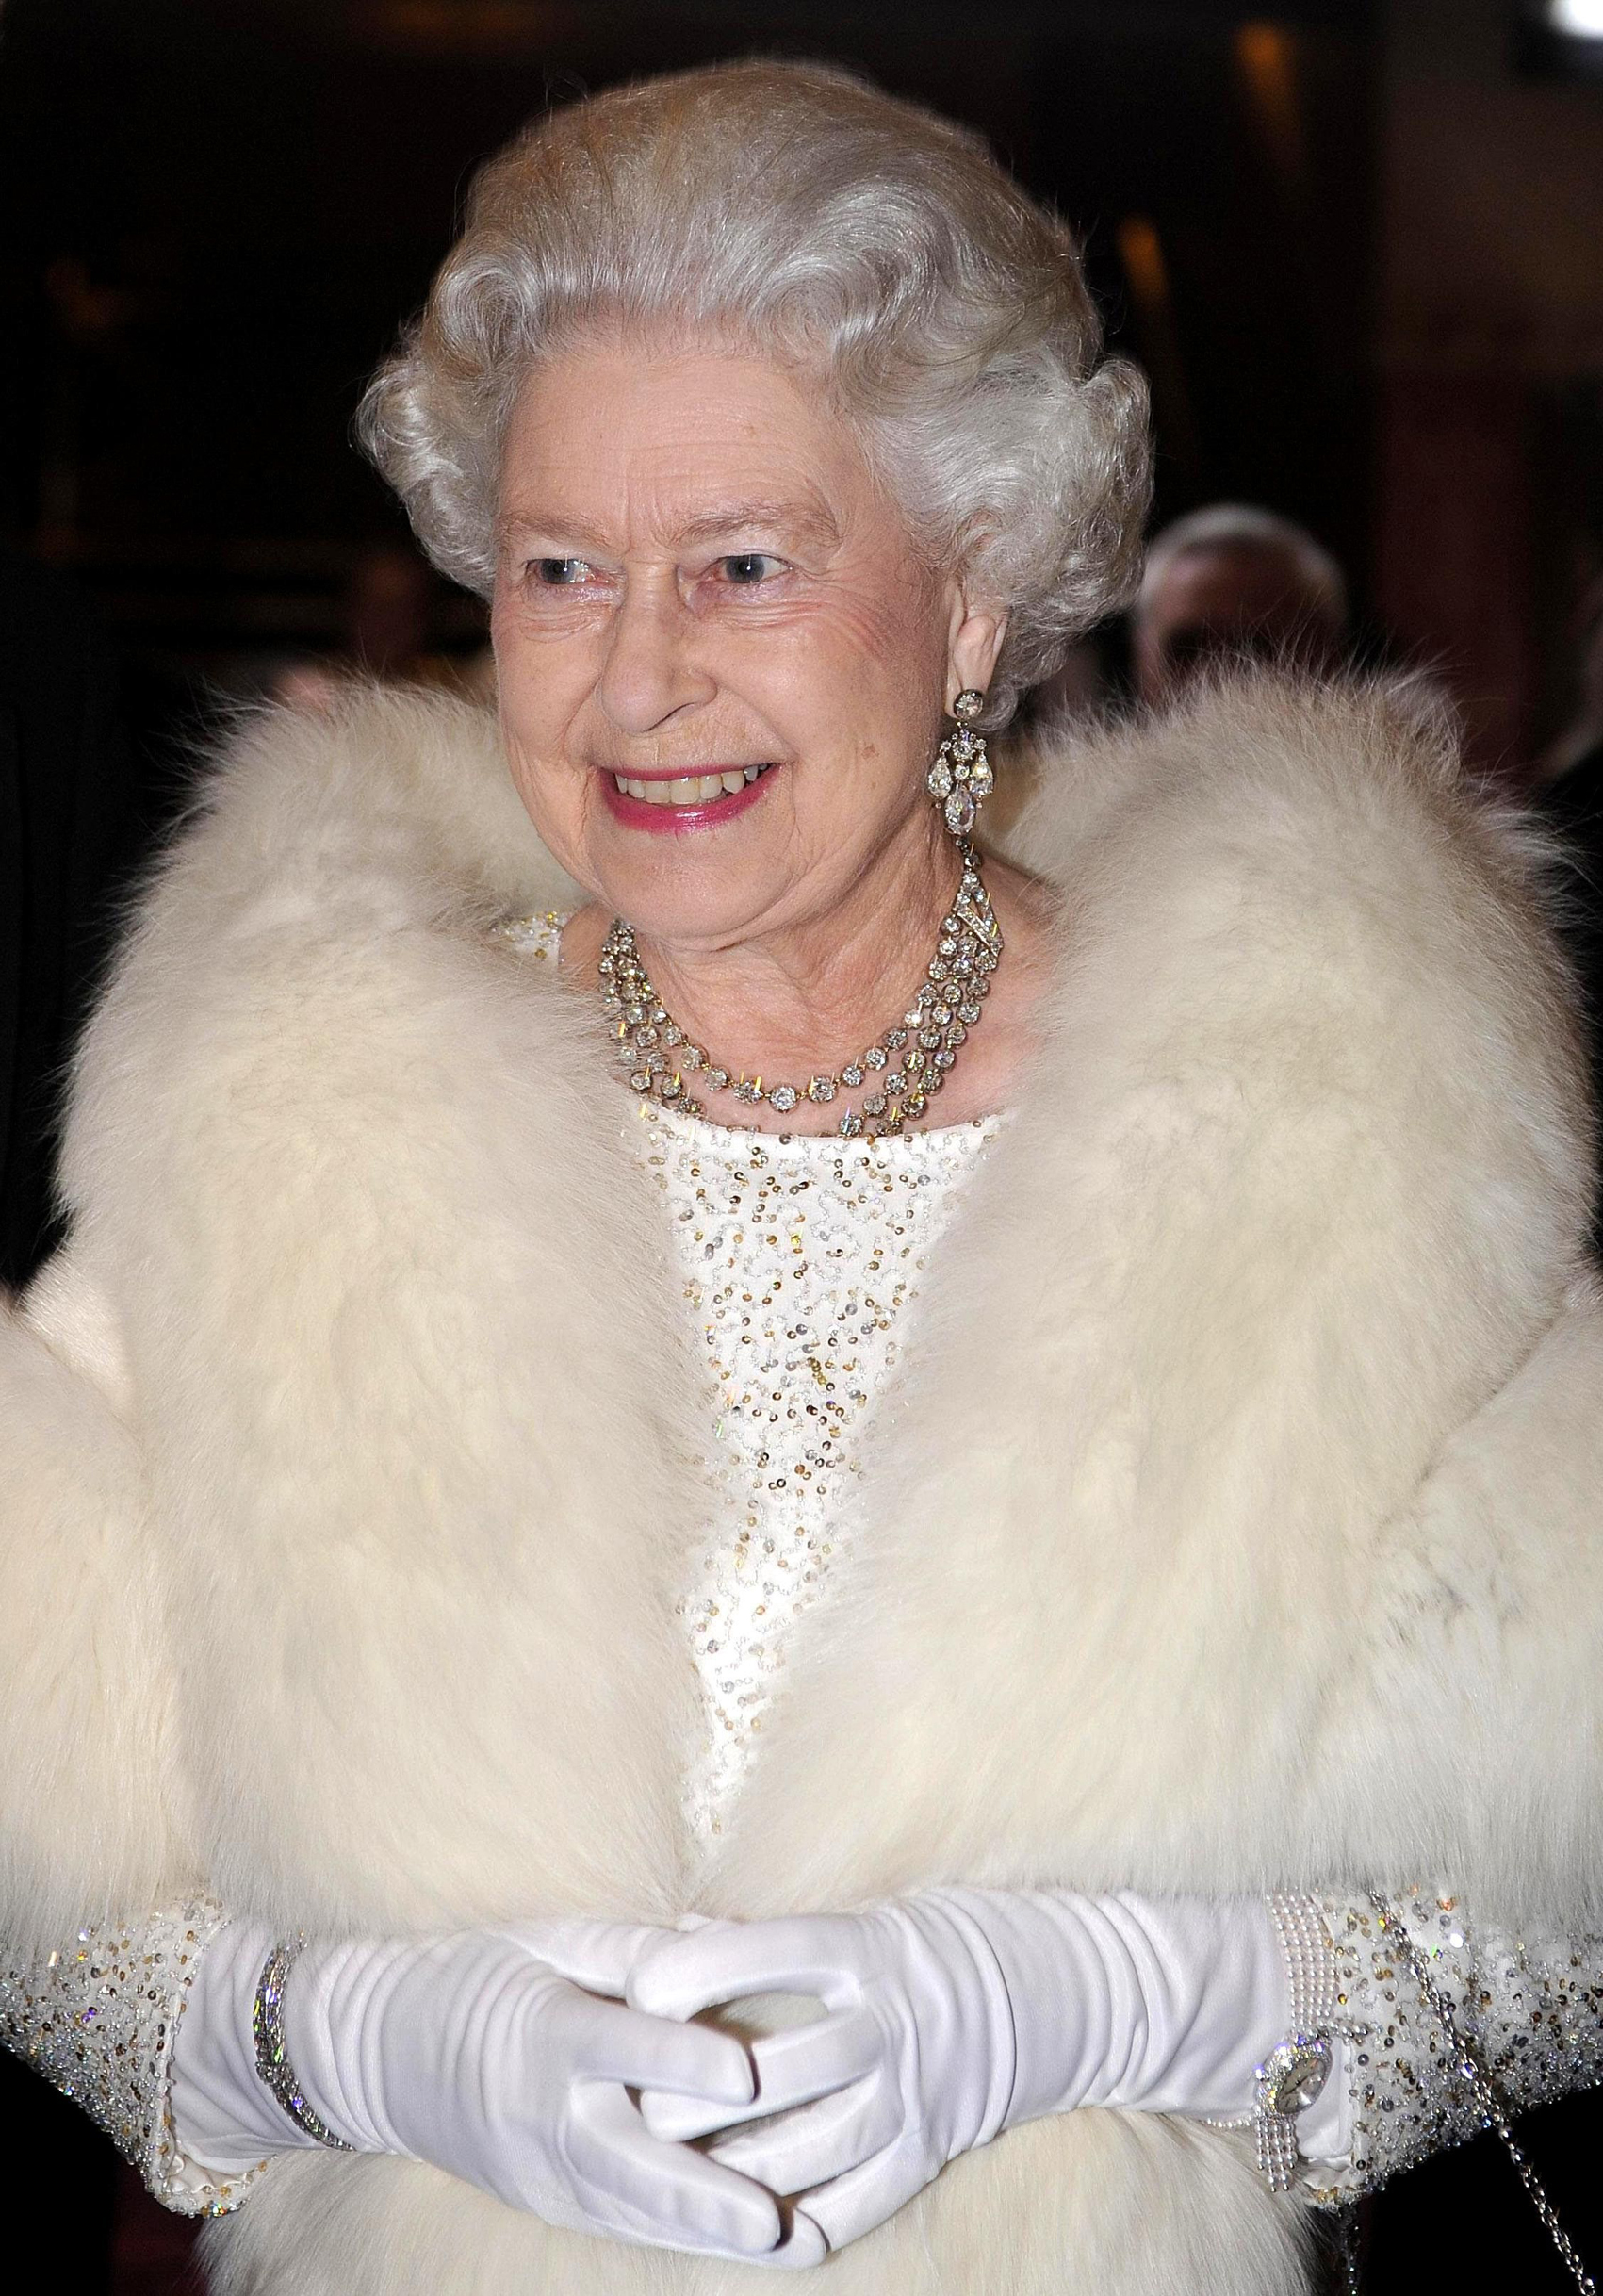 The Queen arrives for the 2007 Royal Variety Performance at the Empire Theatre, Liverpool.